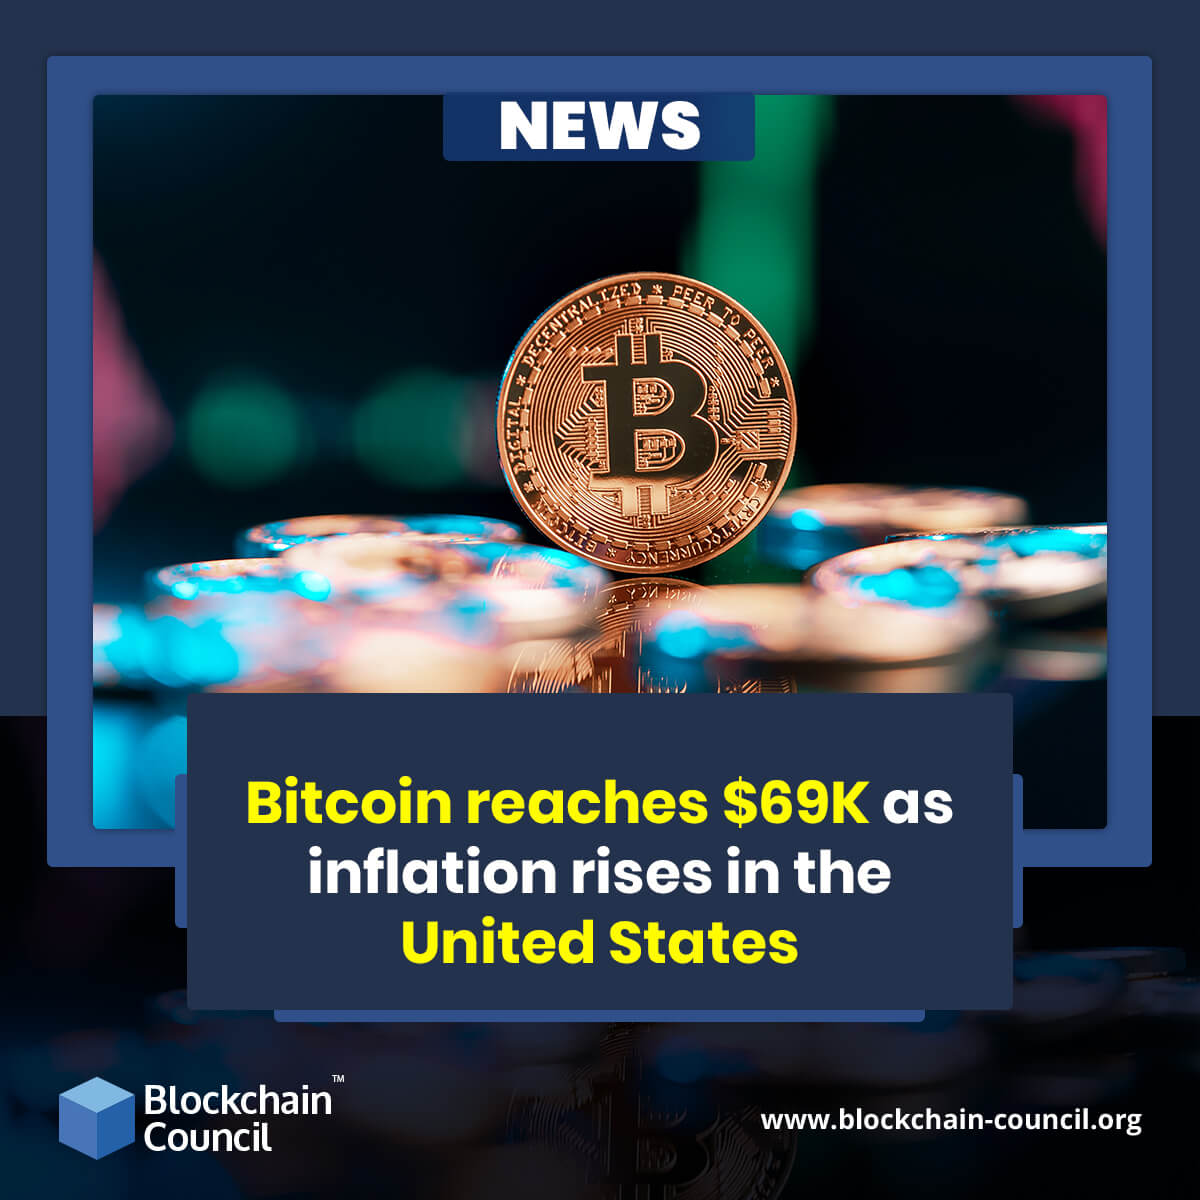 Bitcoin reaches $69K as inflation rises in the United States